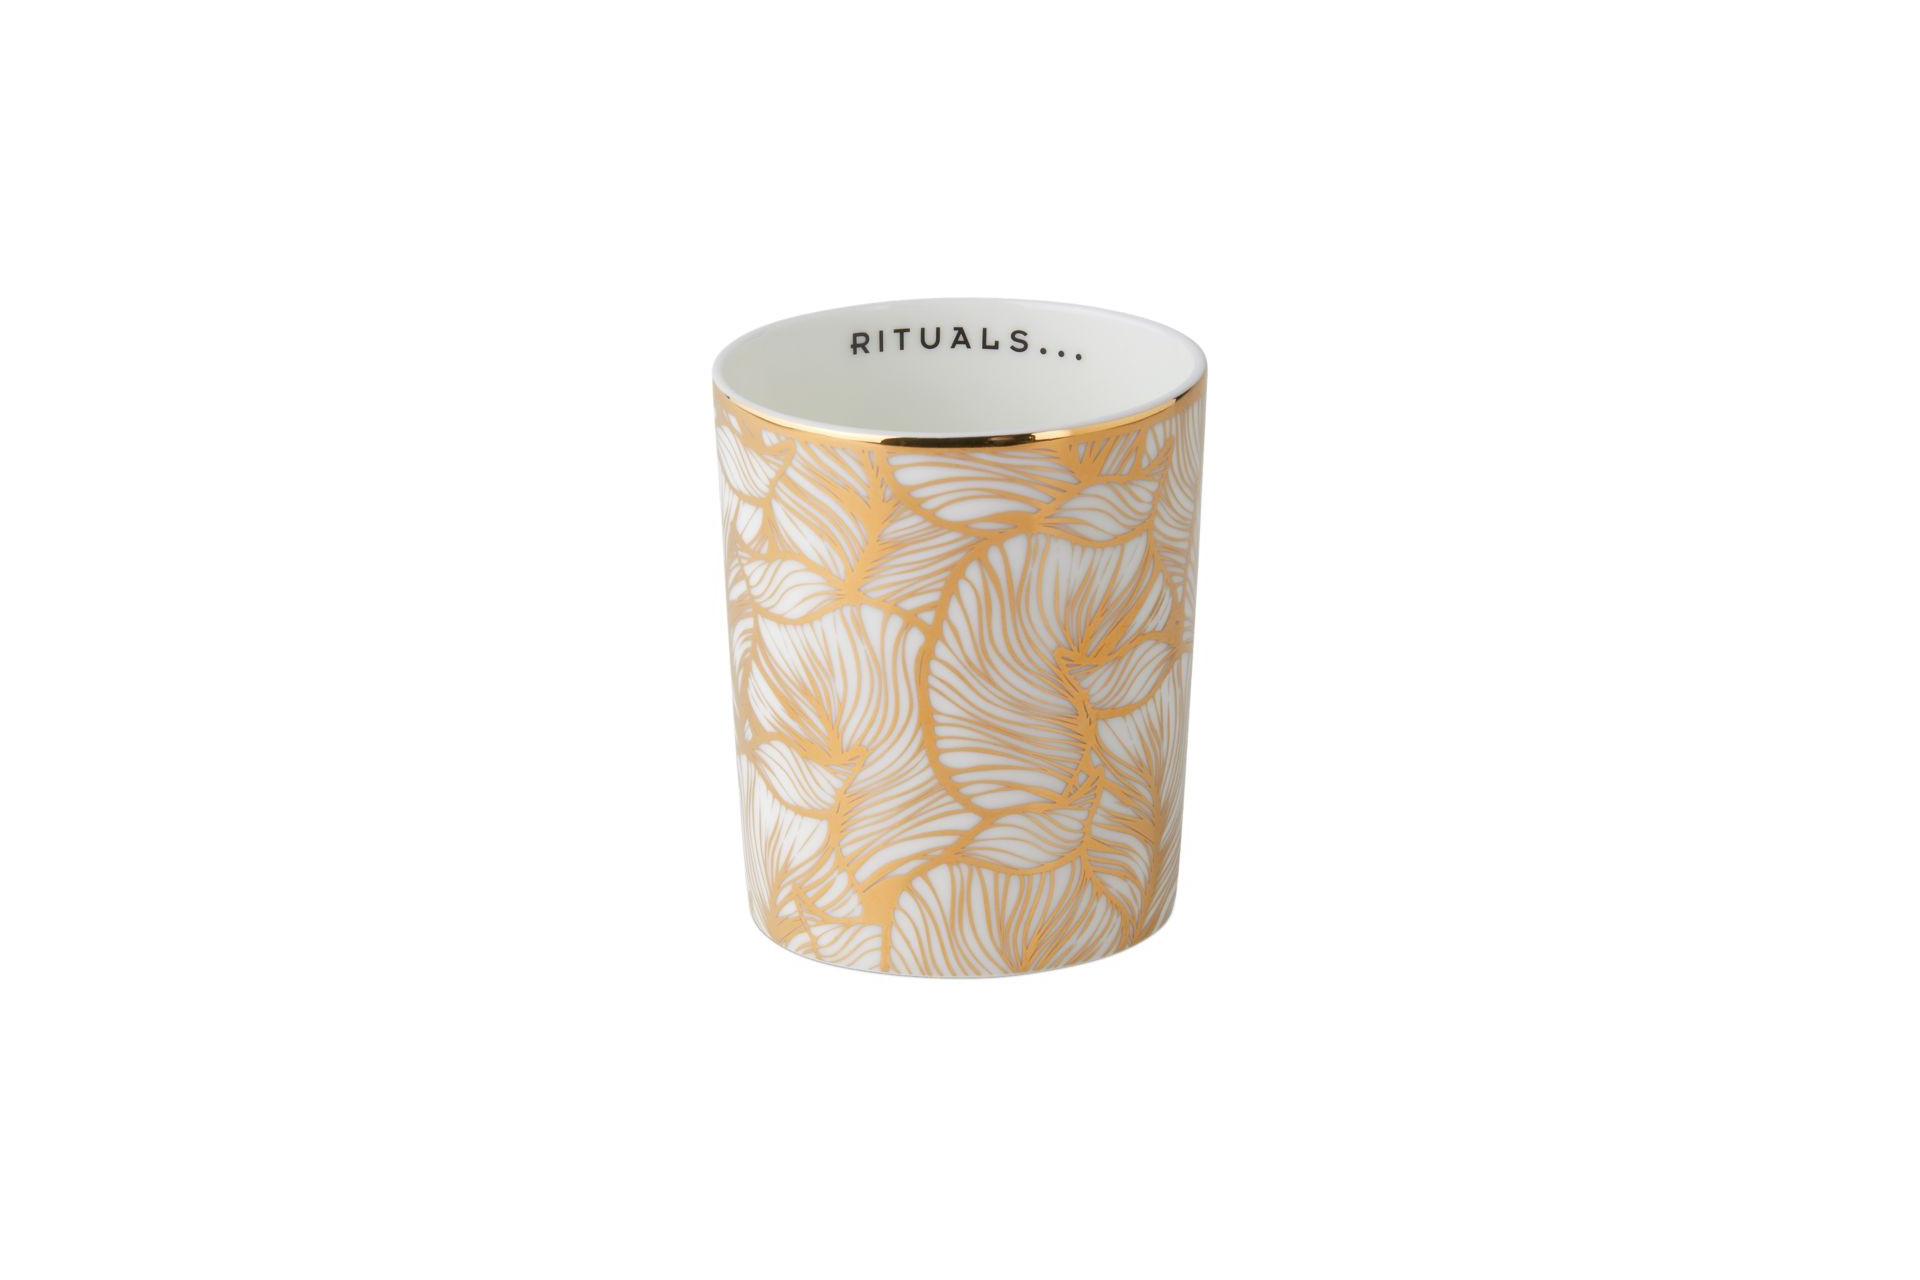 Acheter Rituals Luxury Candle Holder - Golden Leaves